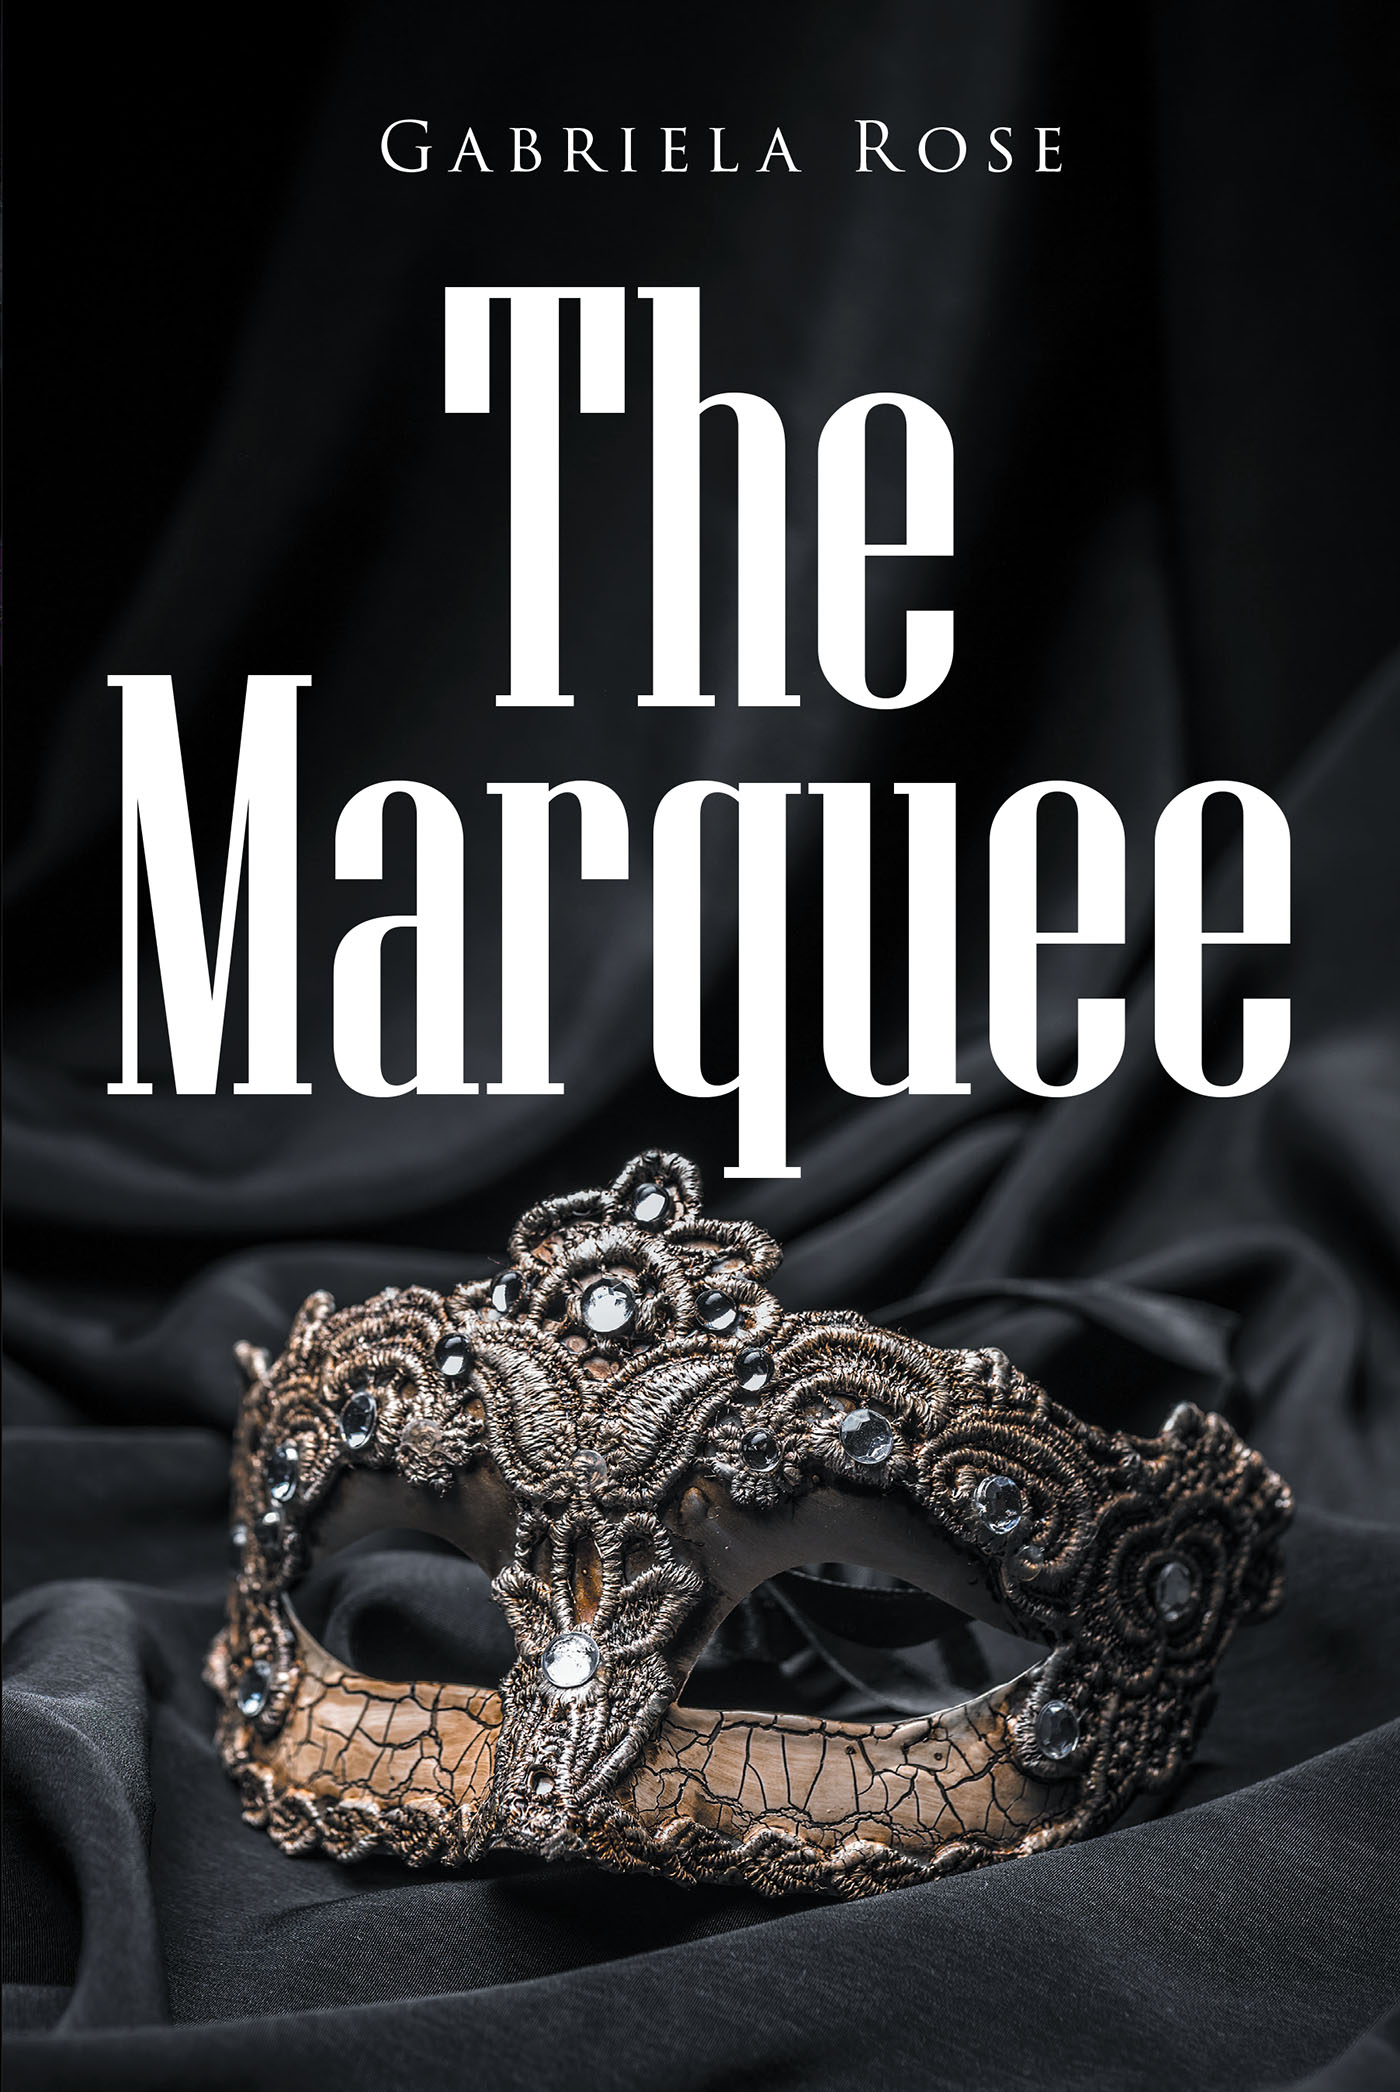 Author Gabriela Rose’s New Book, "The Marquee," is a Compelling Novel That Follows a Supernatural Police Officer Who Must Find a Way to Save the World and Her Loved Ones